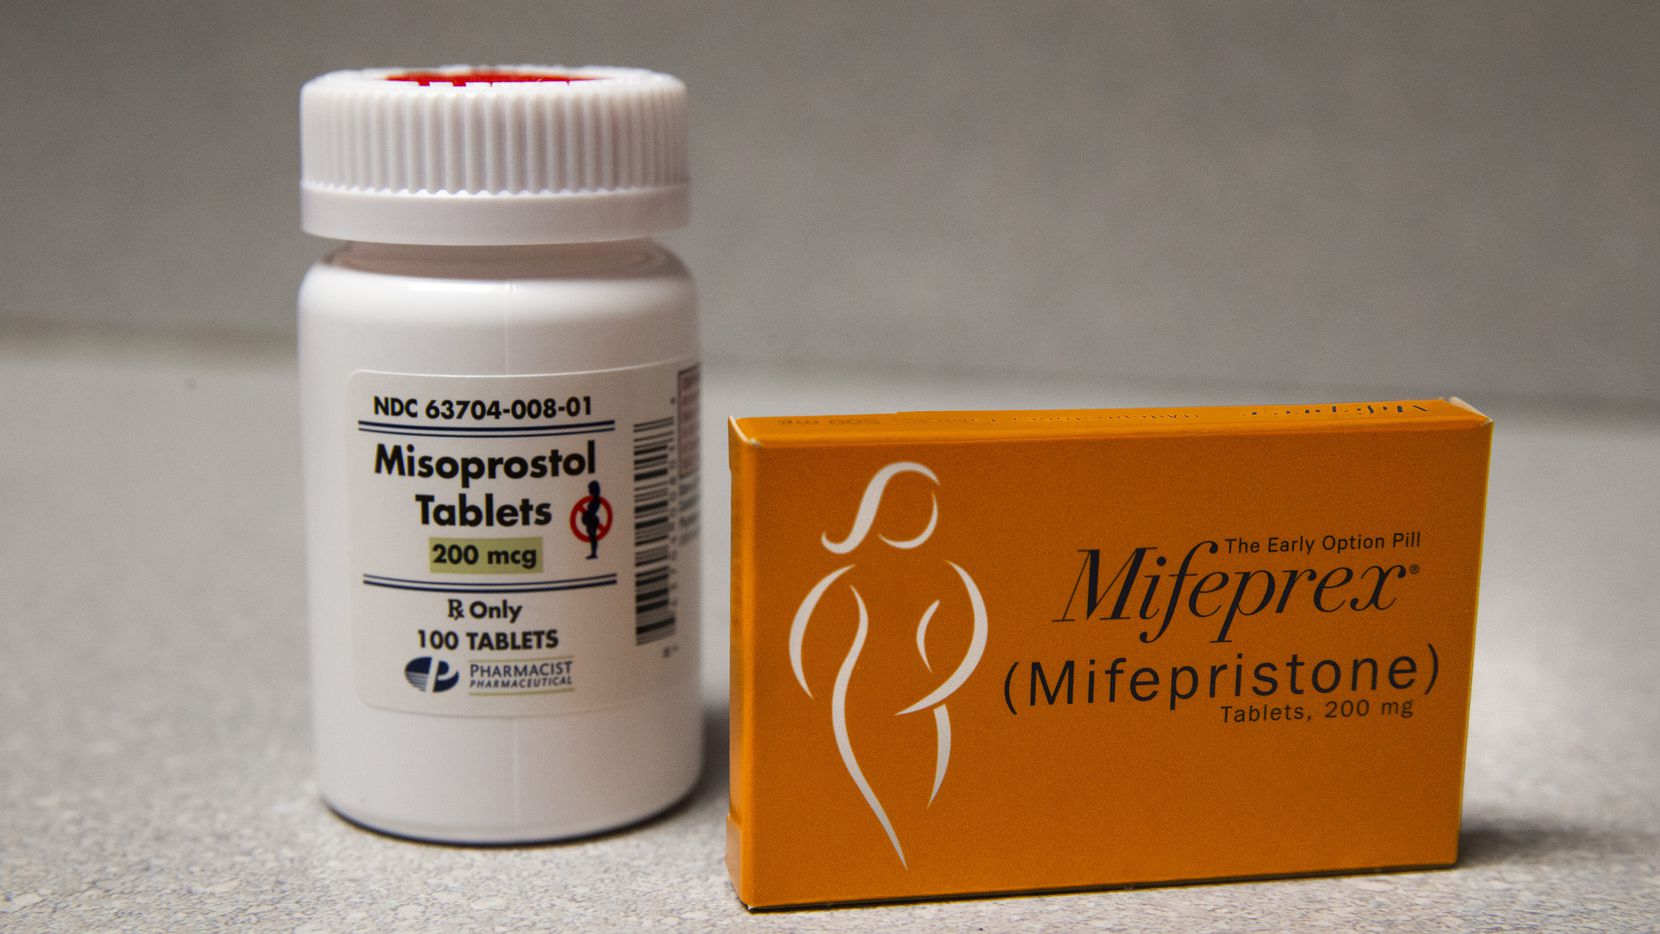 A bottle of misoprostol and a box of Mifeprex (mifespristone) medications at the Whole...